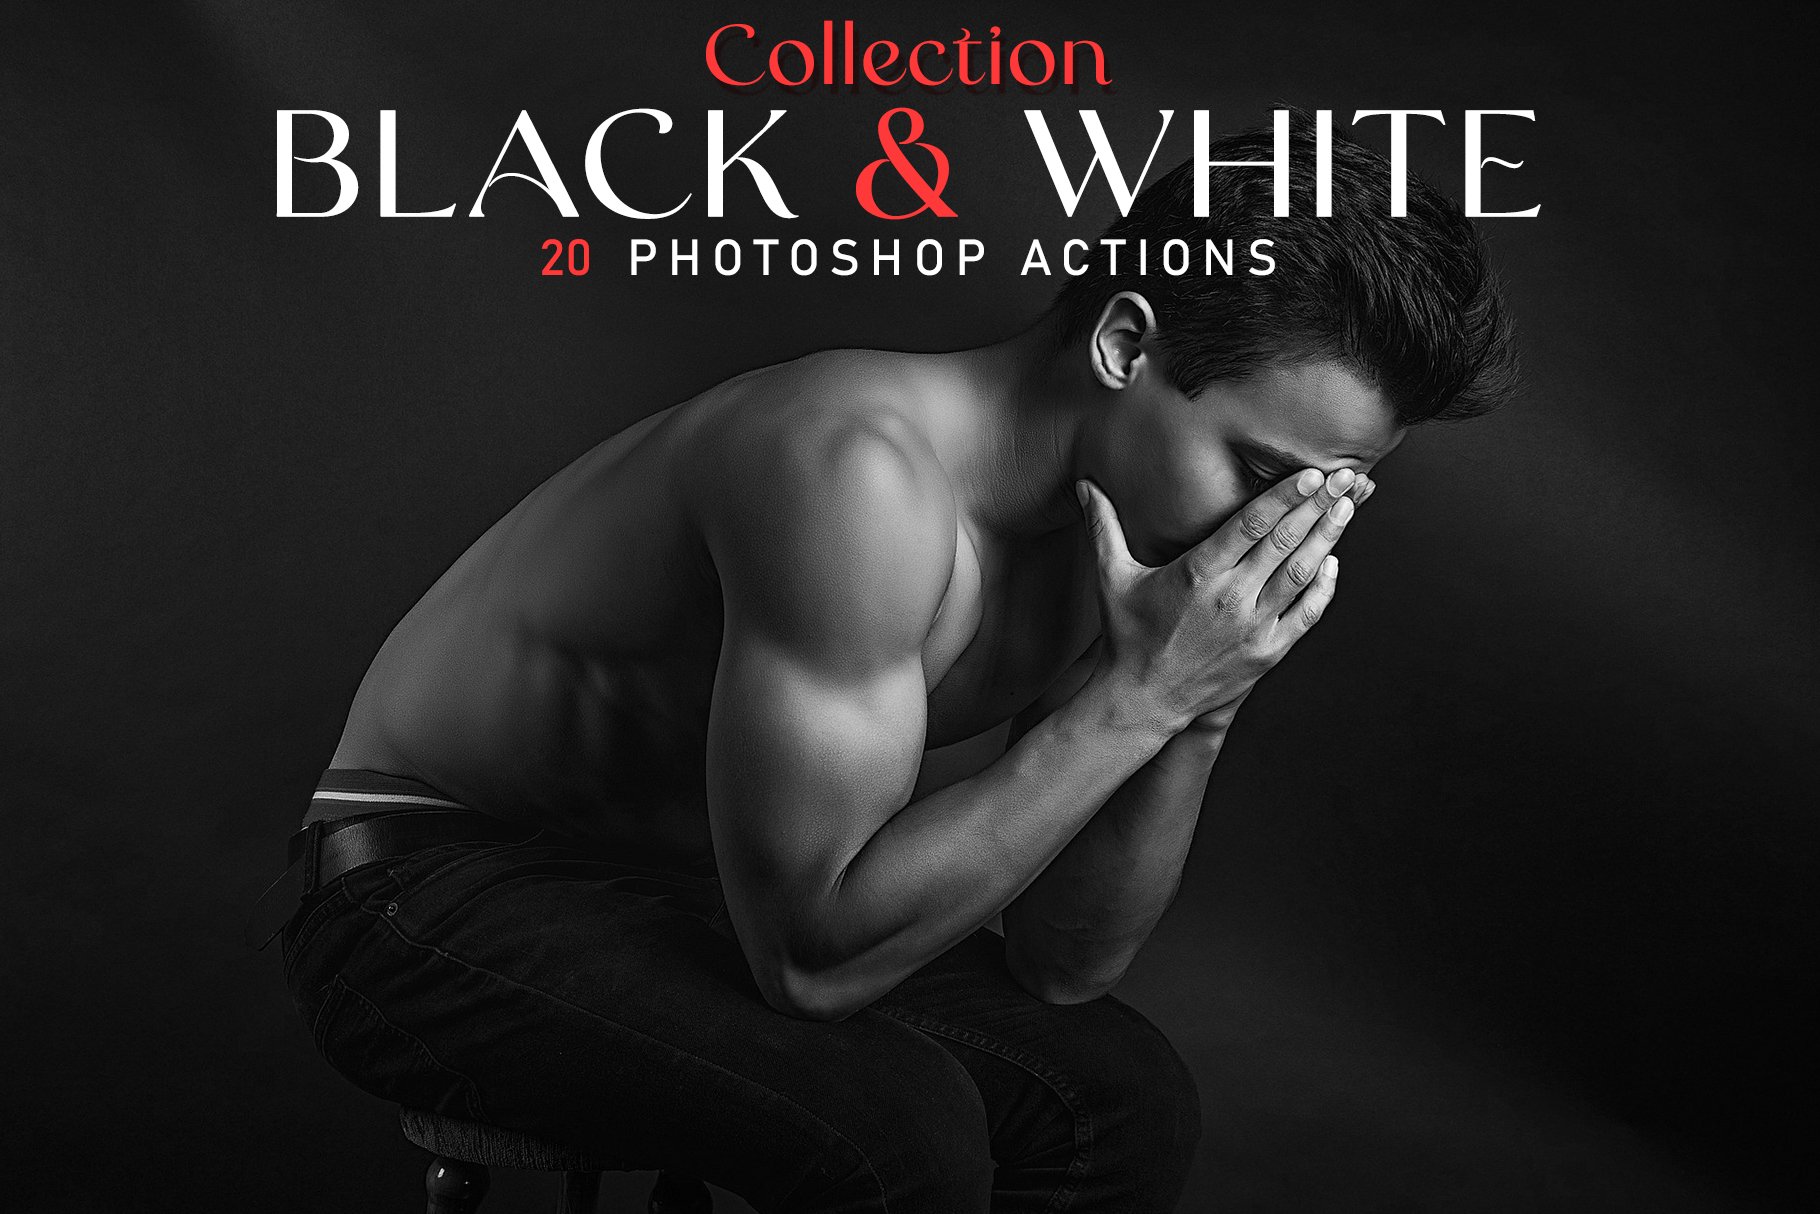 20 Black & White Collection Photoshocover image.